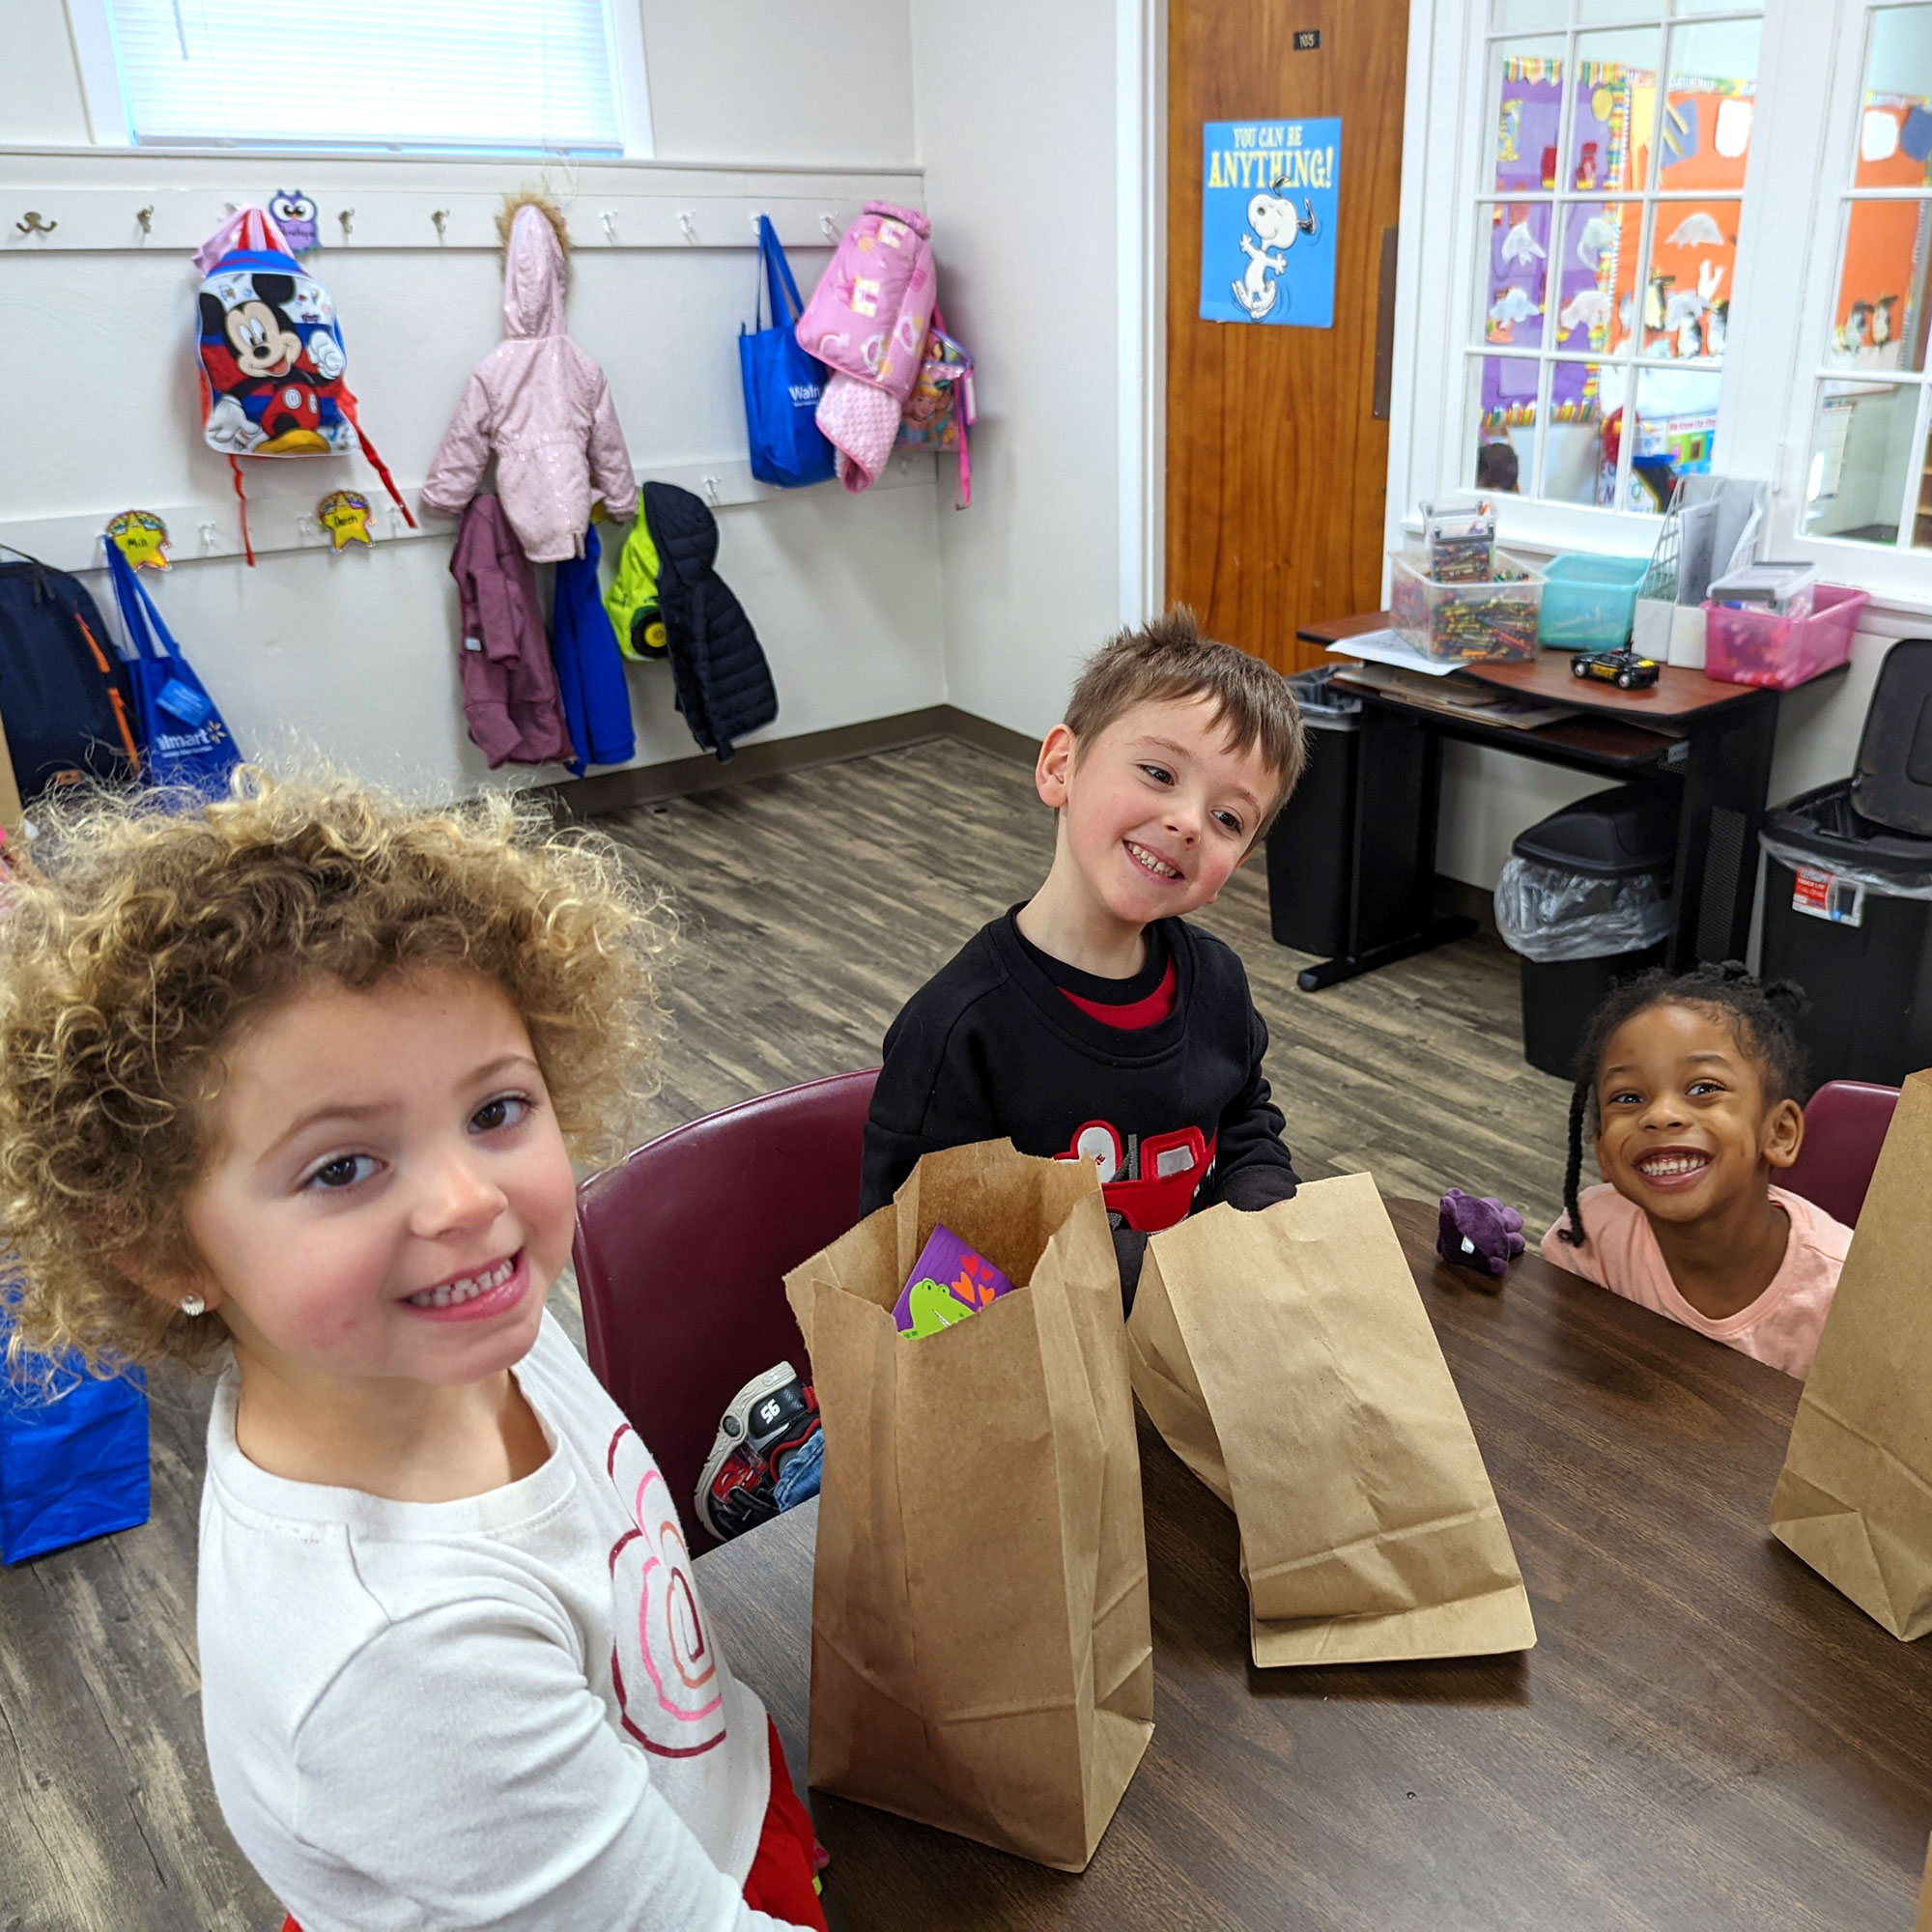 Three young children inspect their lunches in brown bags at school.